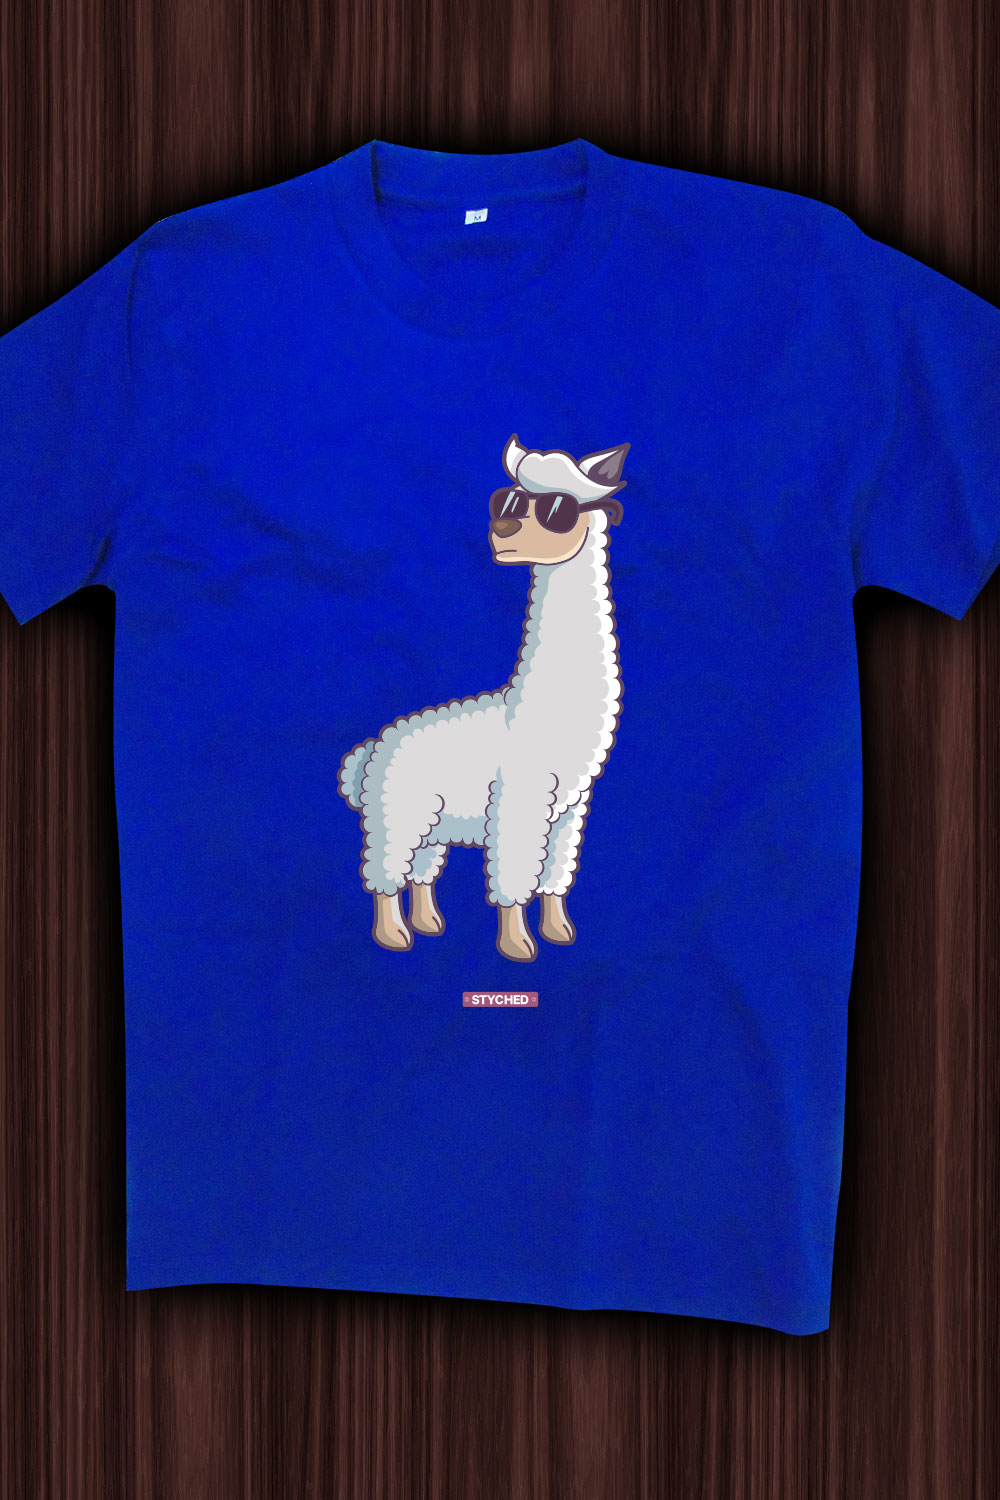 Cool Alpaca wearing sunglasses - Quirky Graphic T-Shirt Blue Color